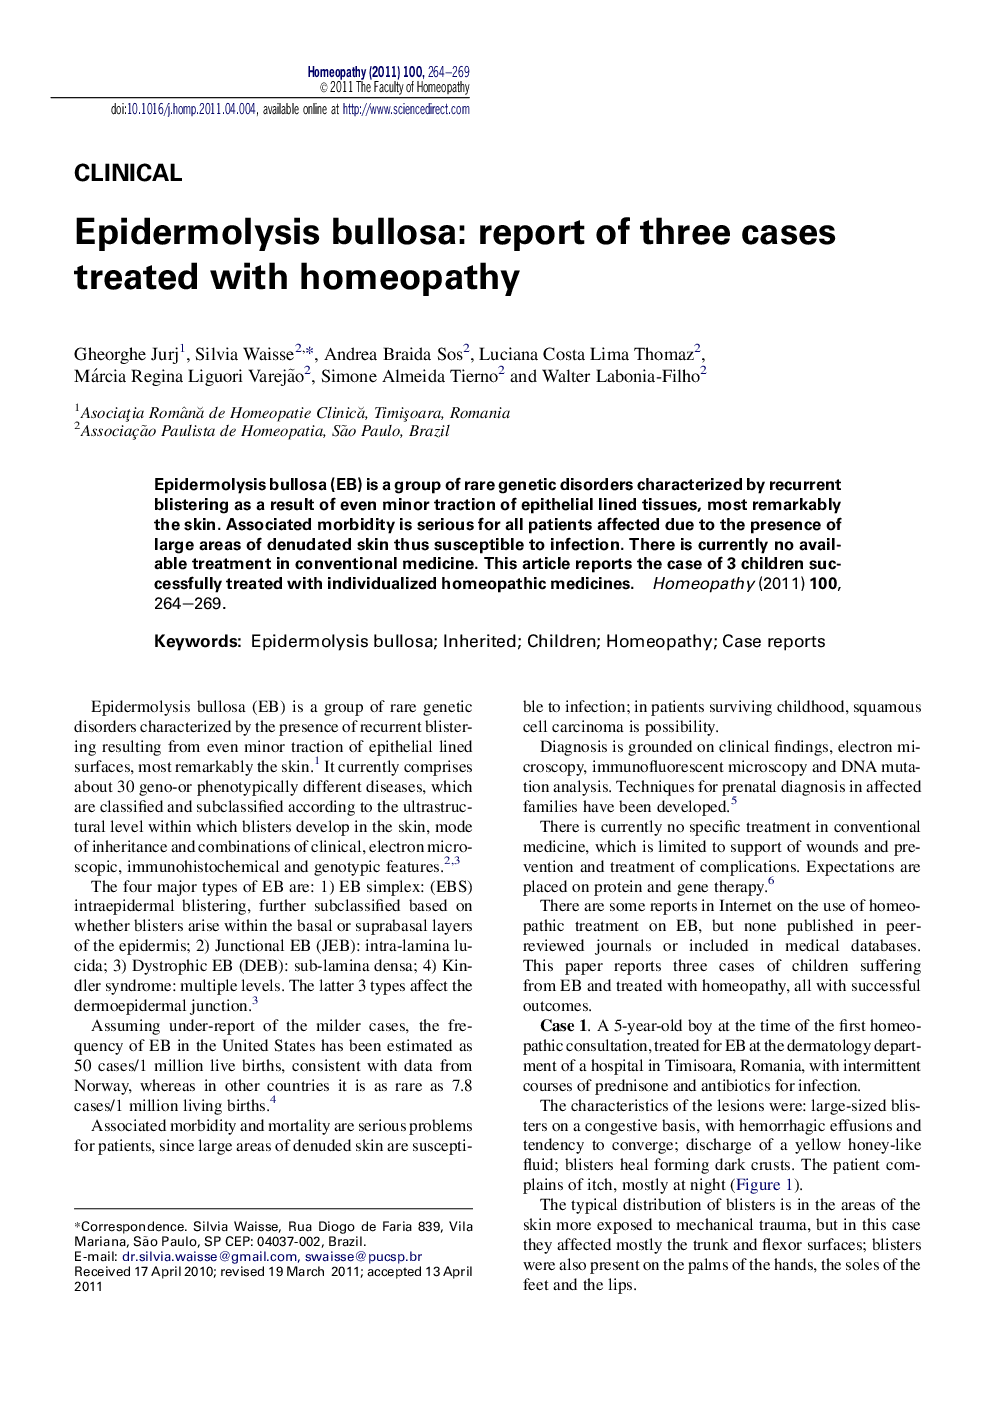 Epidermolysis bullosa: report of three cases treated with homeopathy